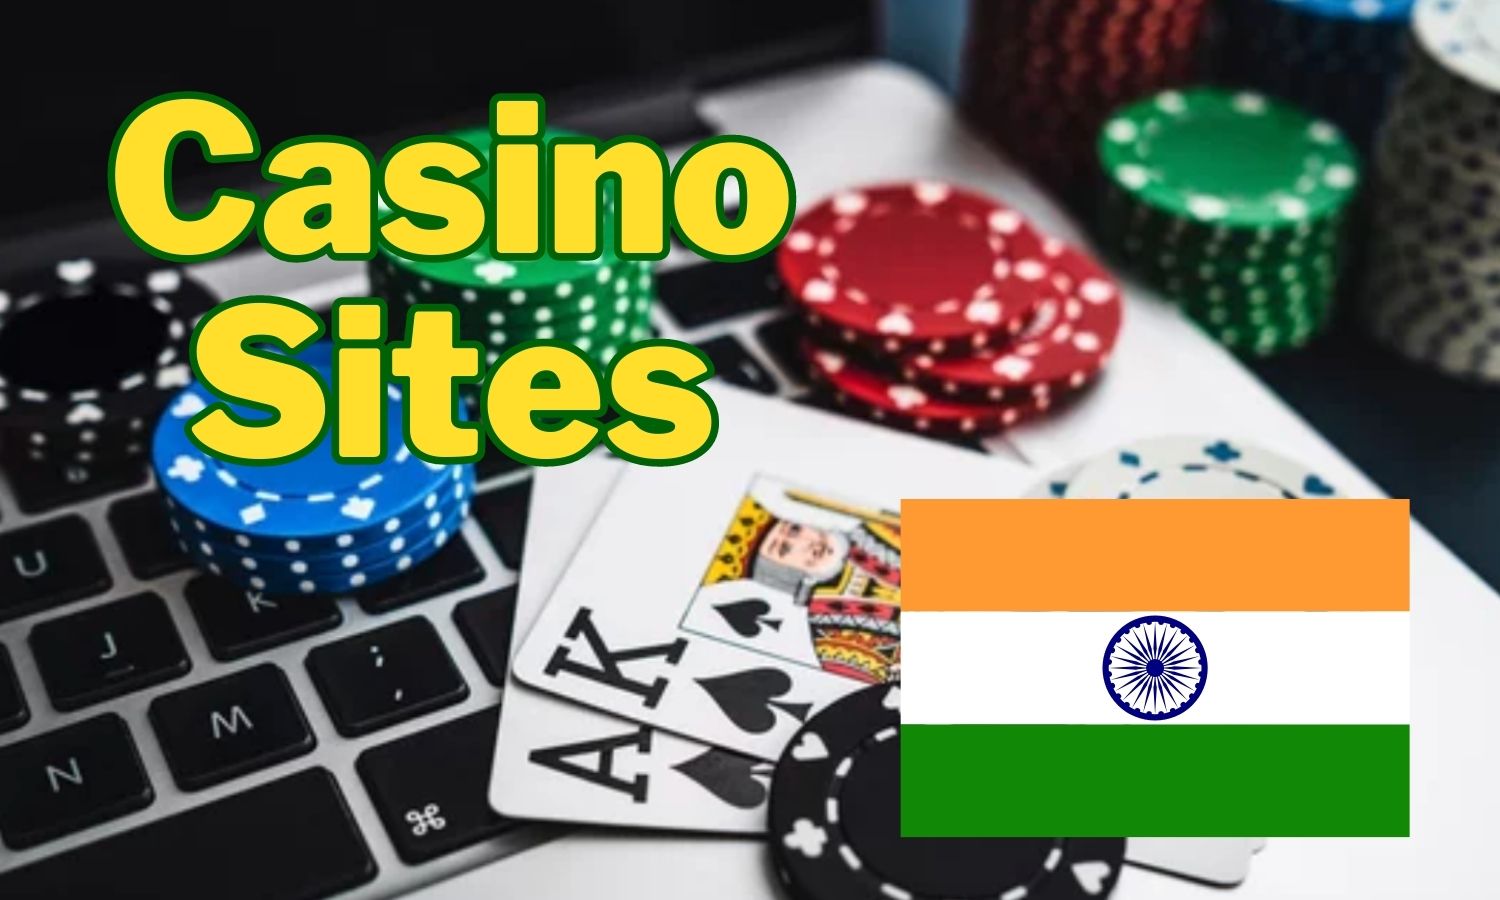 Get access to the Best Online Casino Sites in India from here